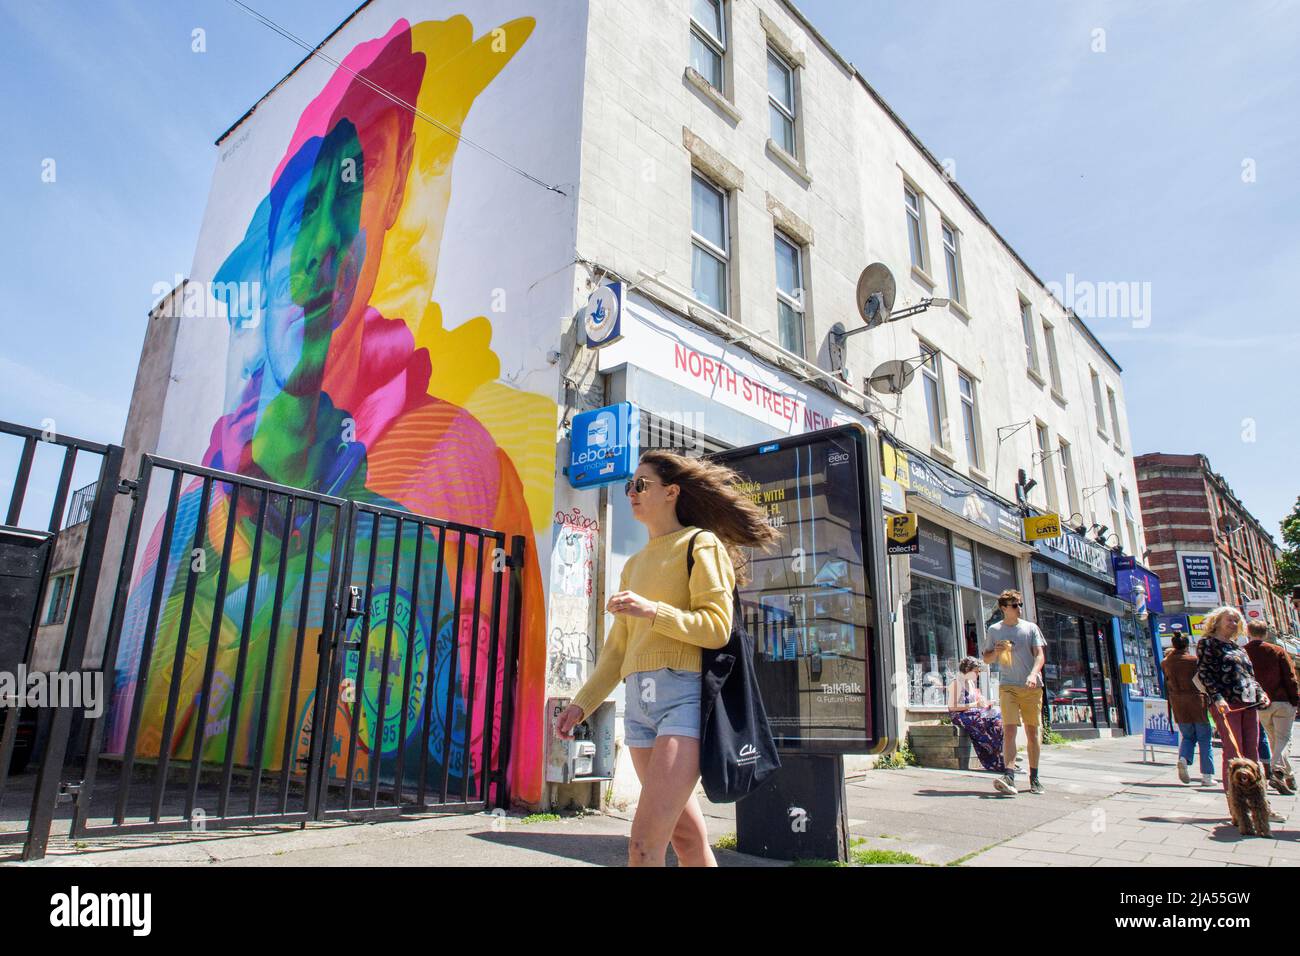 Bristol, UK. 27th May, 2022. Artwork created by Irish artist Aches for the Upfest 2022 festival,Europe's largest Street Art & Graffiti festival is pictured on the streets Bedminster, Bristol. Credit: Lynchpics/Alamy Live News Stock Photo